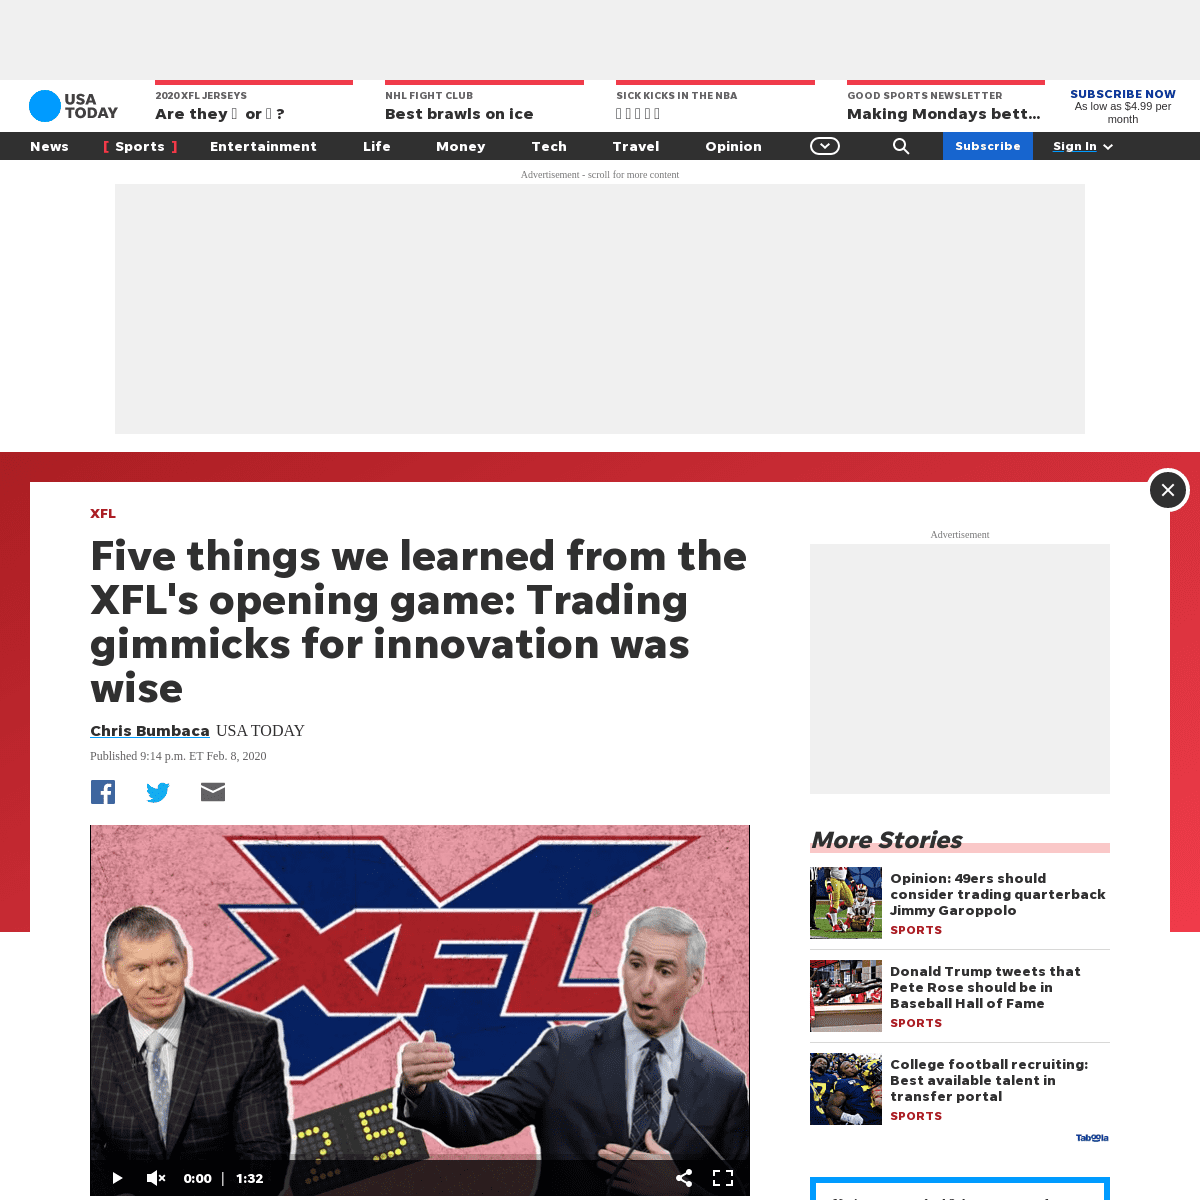 A complete backup of www.usatoday.com/story/sports/xfl/2020/02/08/xfl-opening-weekend-five-things-we-learned-dragons-dc-defender